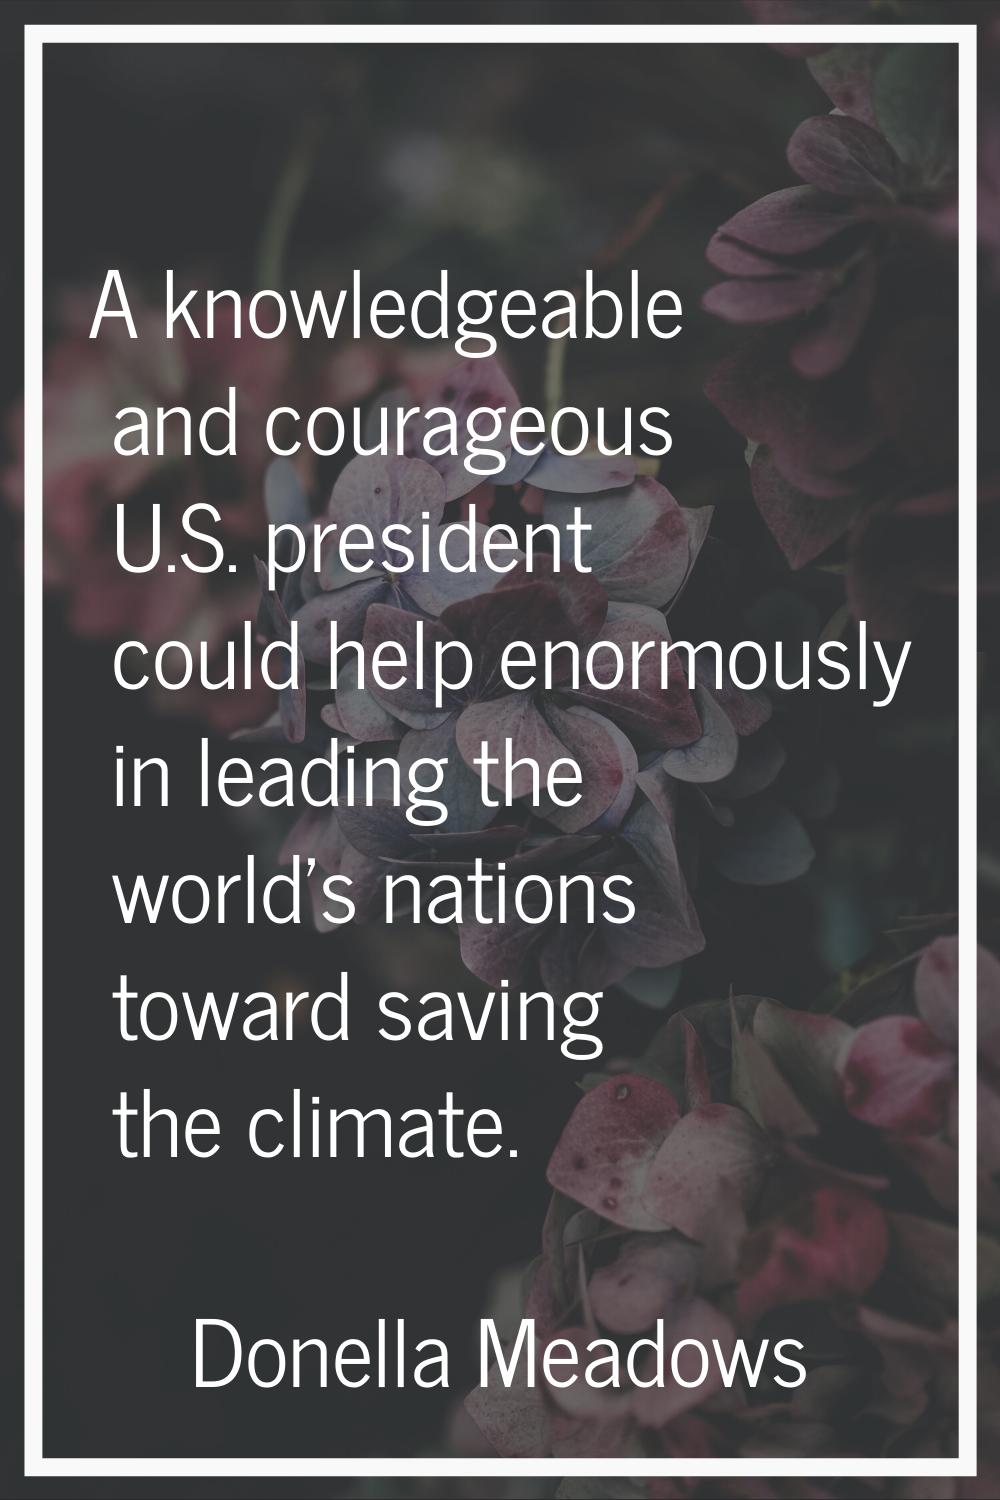 A knowledgeable and courageous U.S. president could help enormously in leading the world's nations 